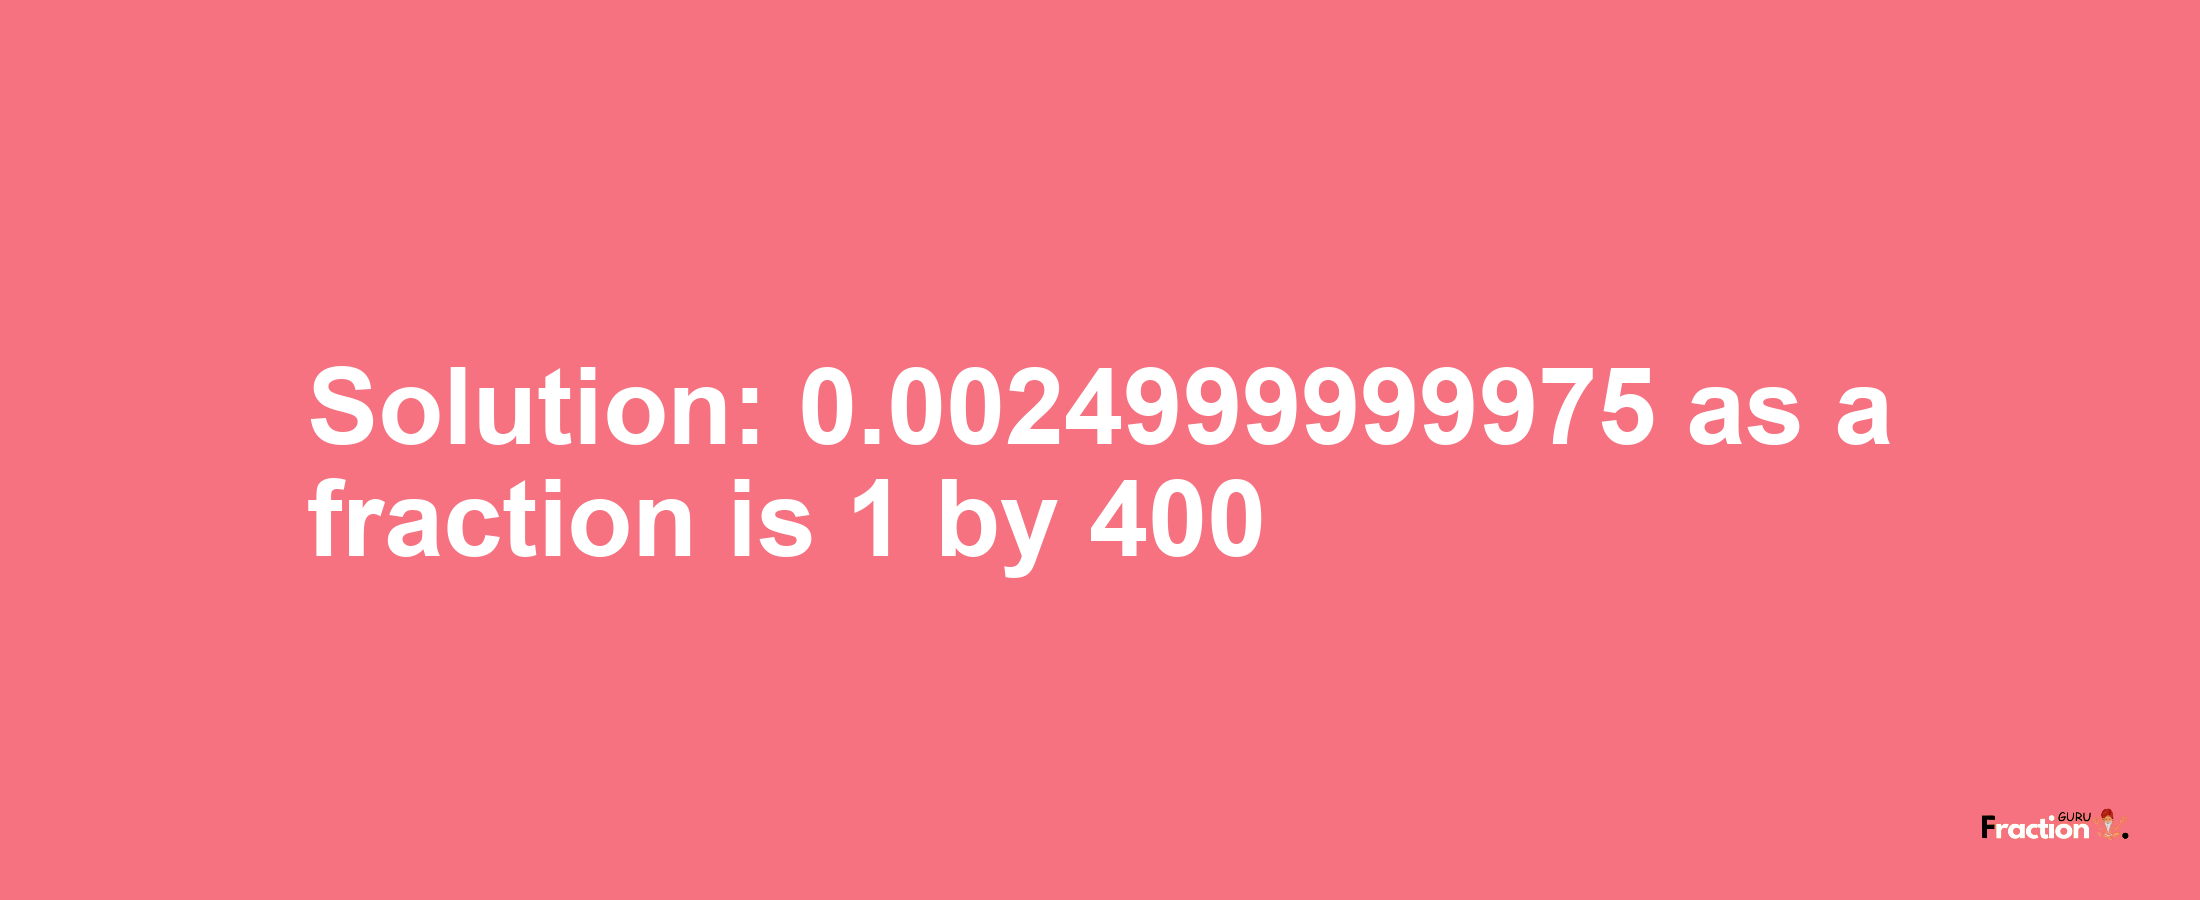 Solution:0.0024999999975 as a fraction is 1/400